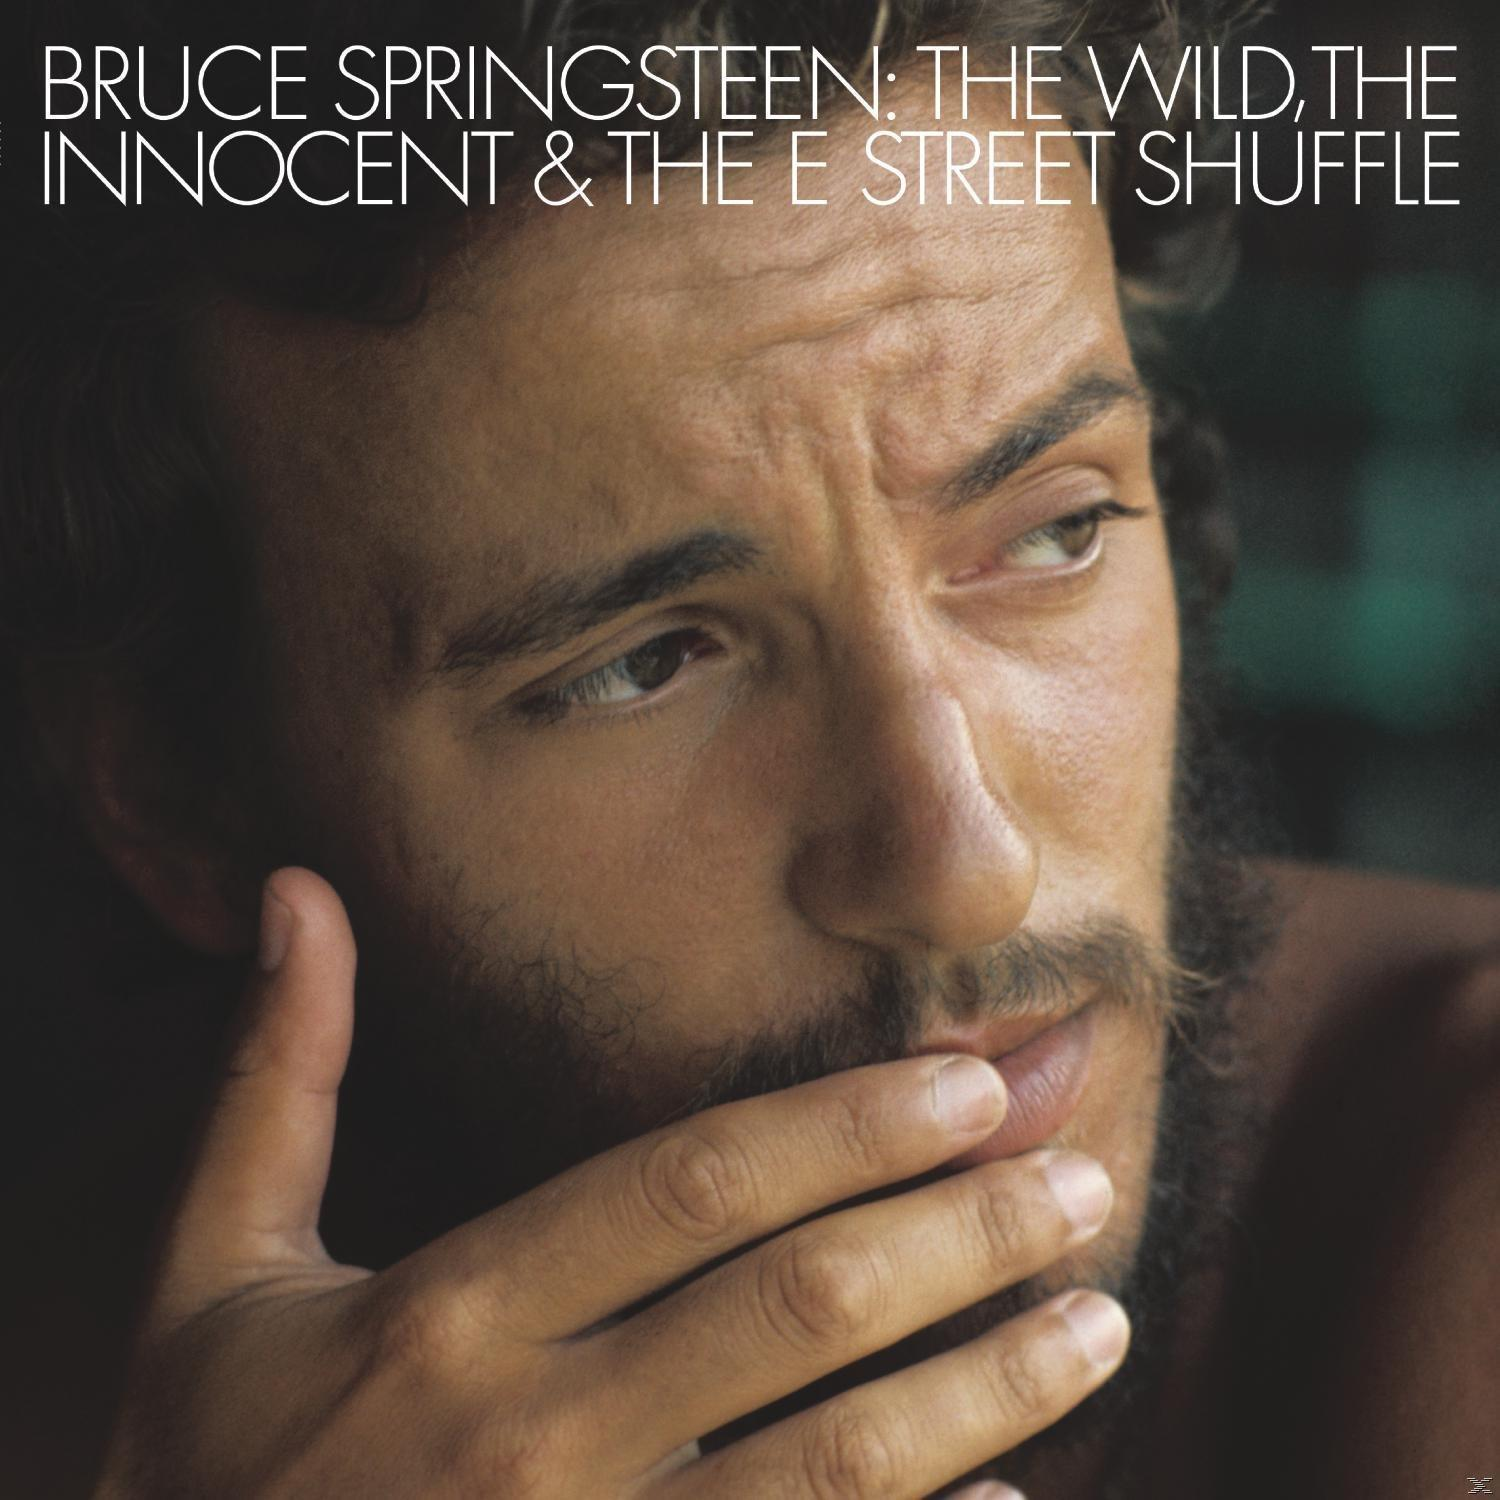 (Vinyl) Shuffle Bruce The And - - Wild, Springsteen Street Innocent The The E